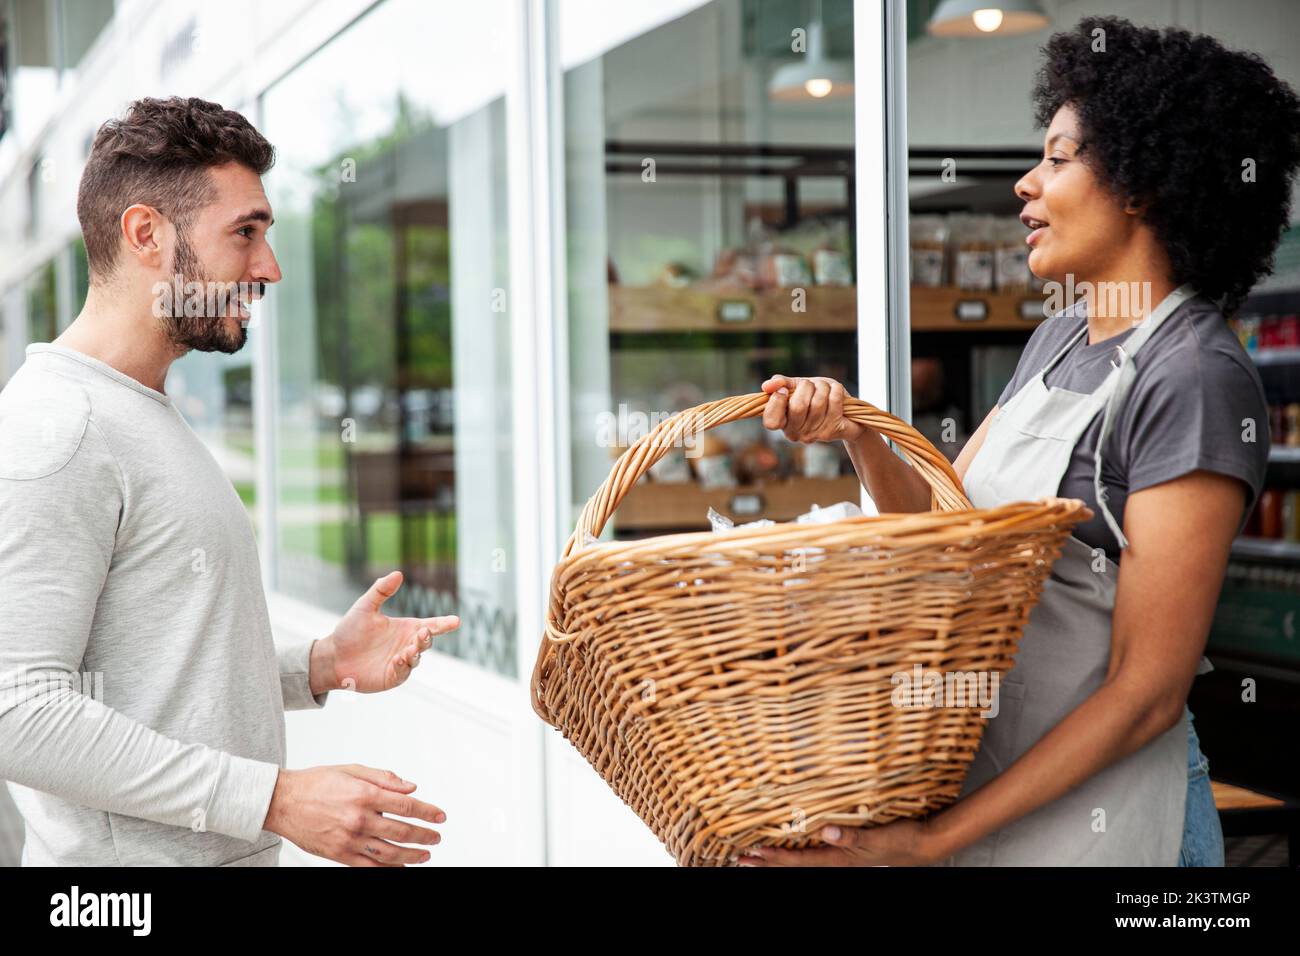 African American female bakery worker receiving basket from colleague Stock Photo